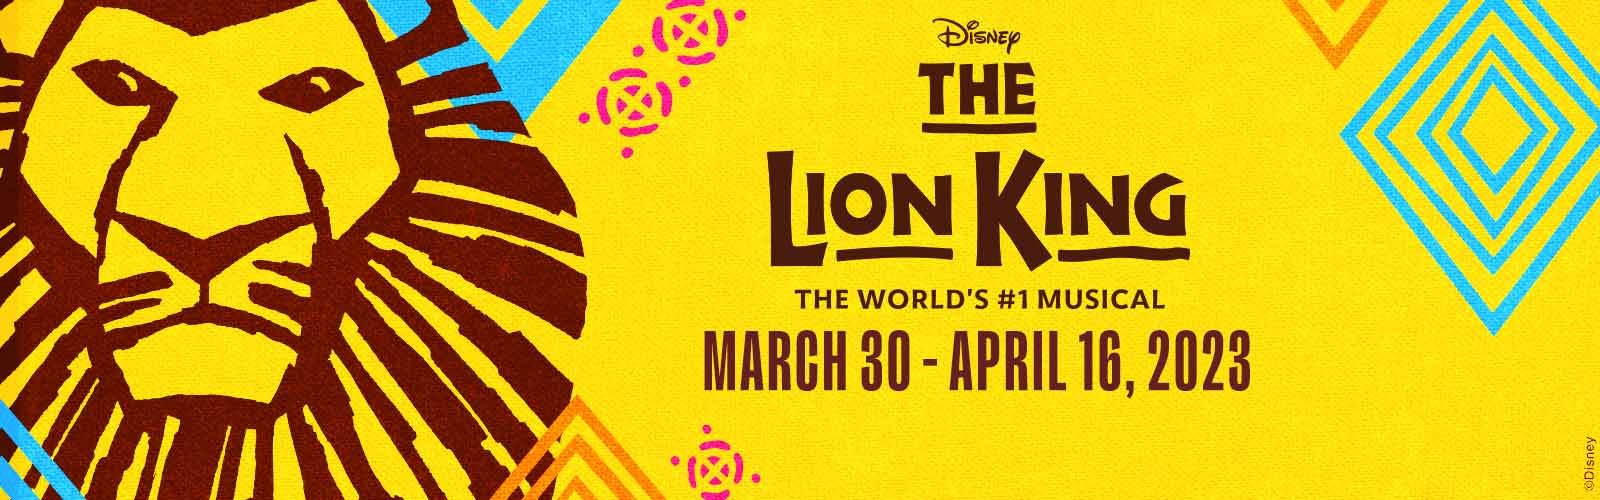 The Lion King on sale now!